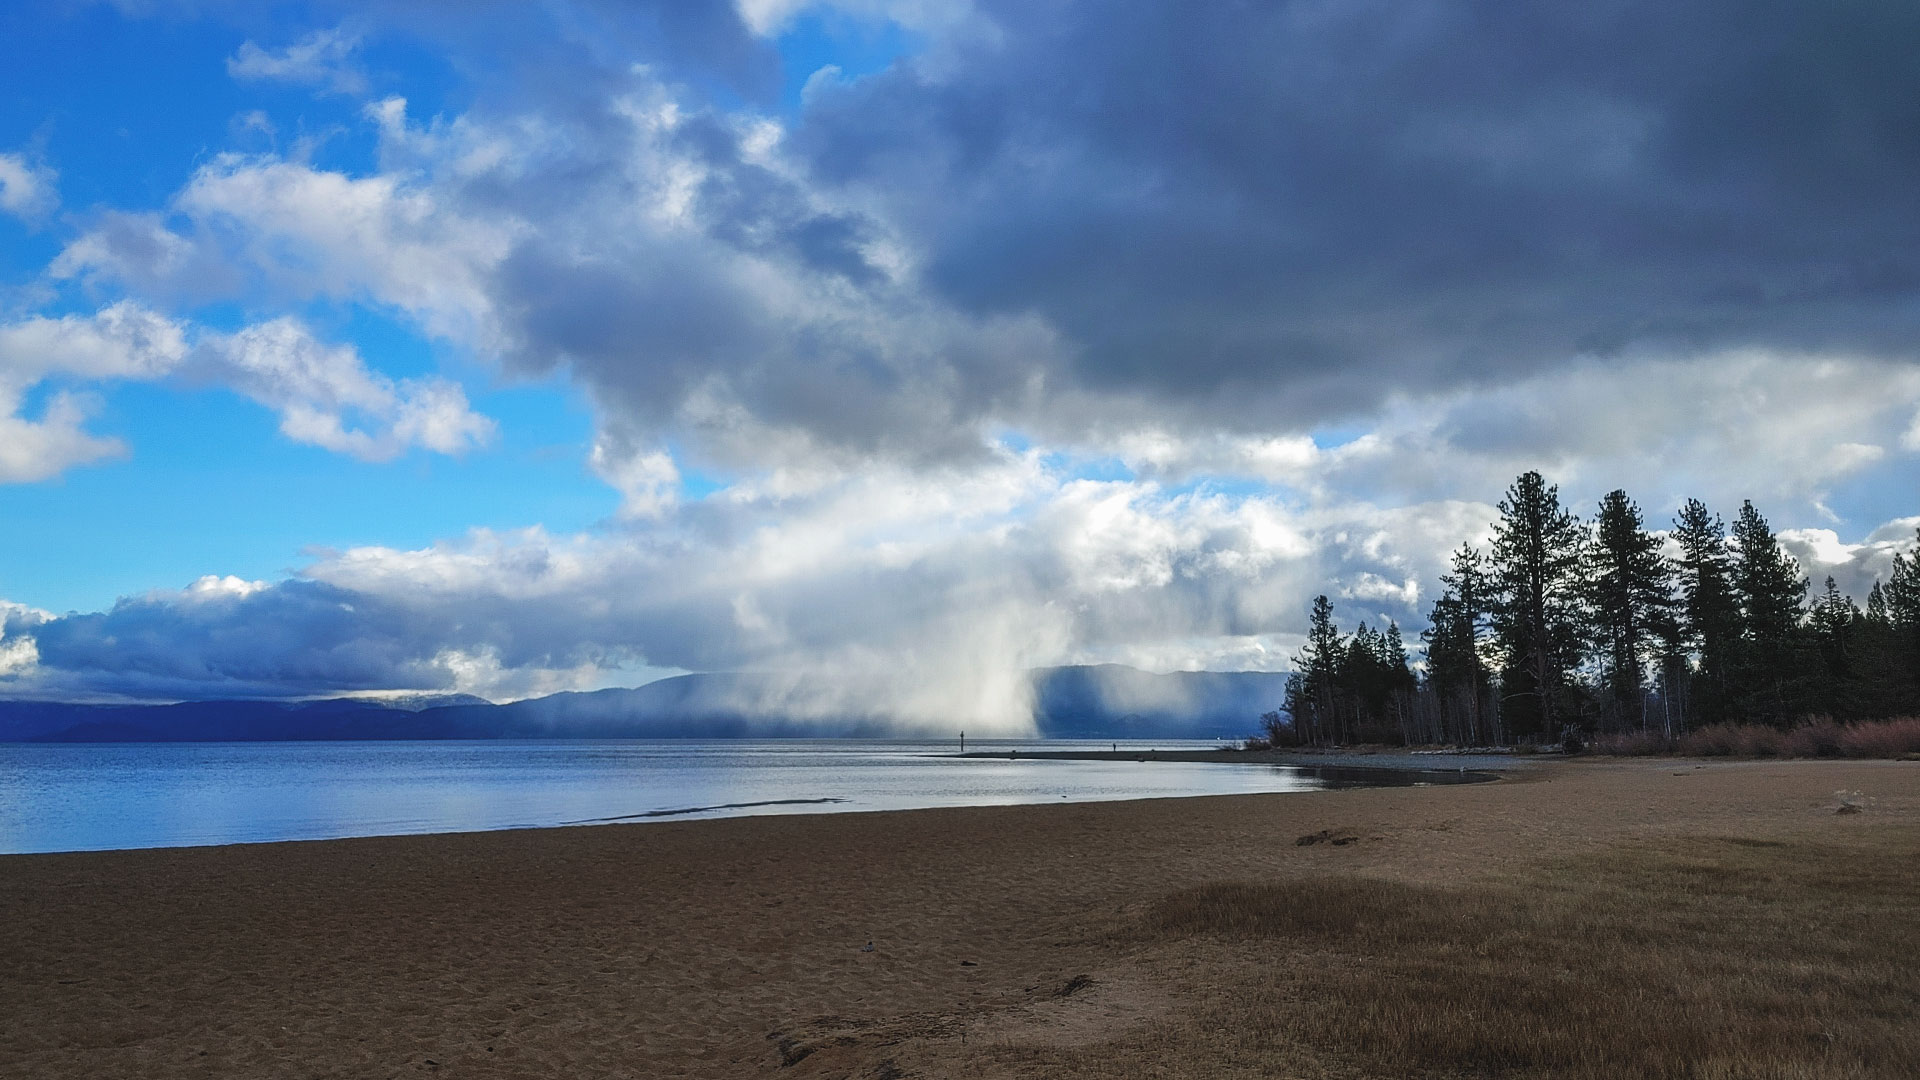 Clouds and mist over lake with pine trees and a beach